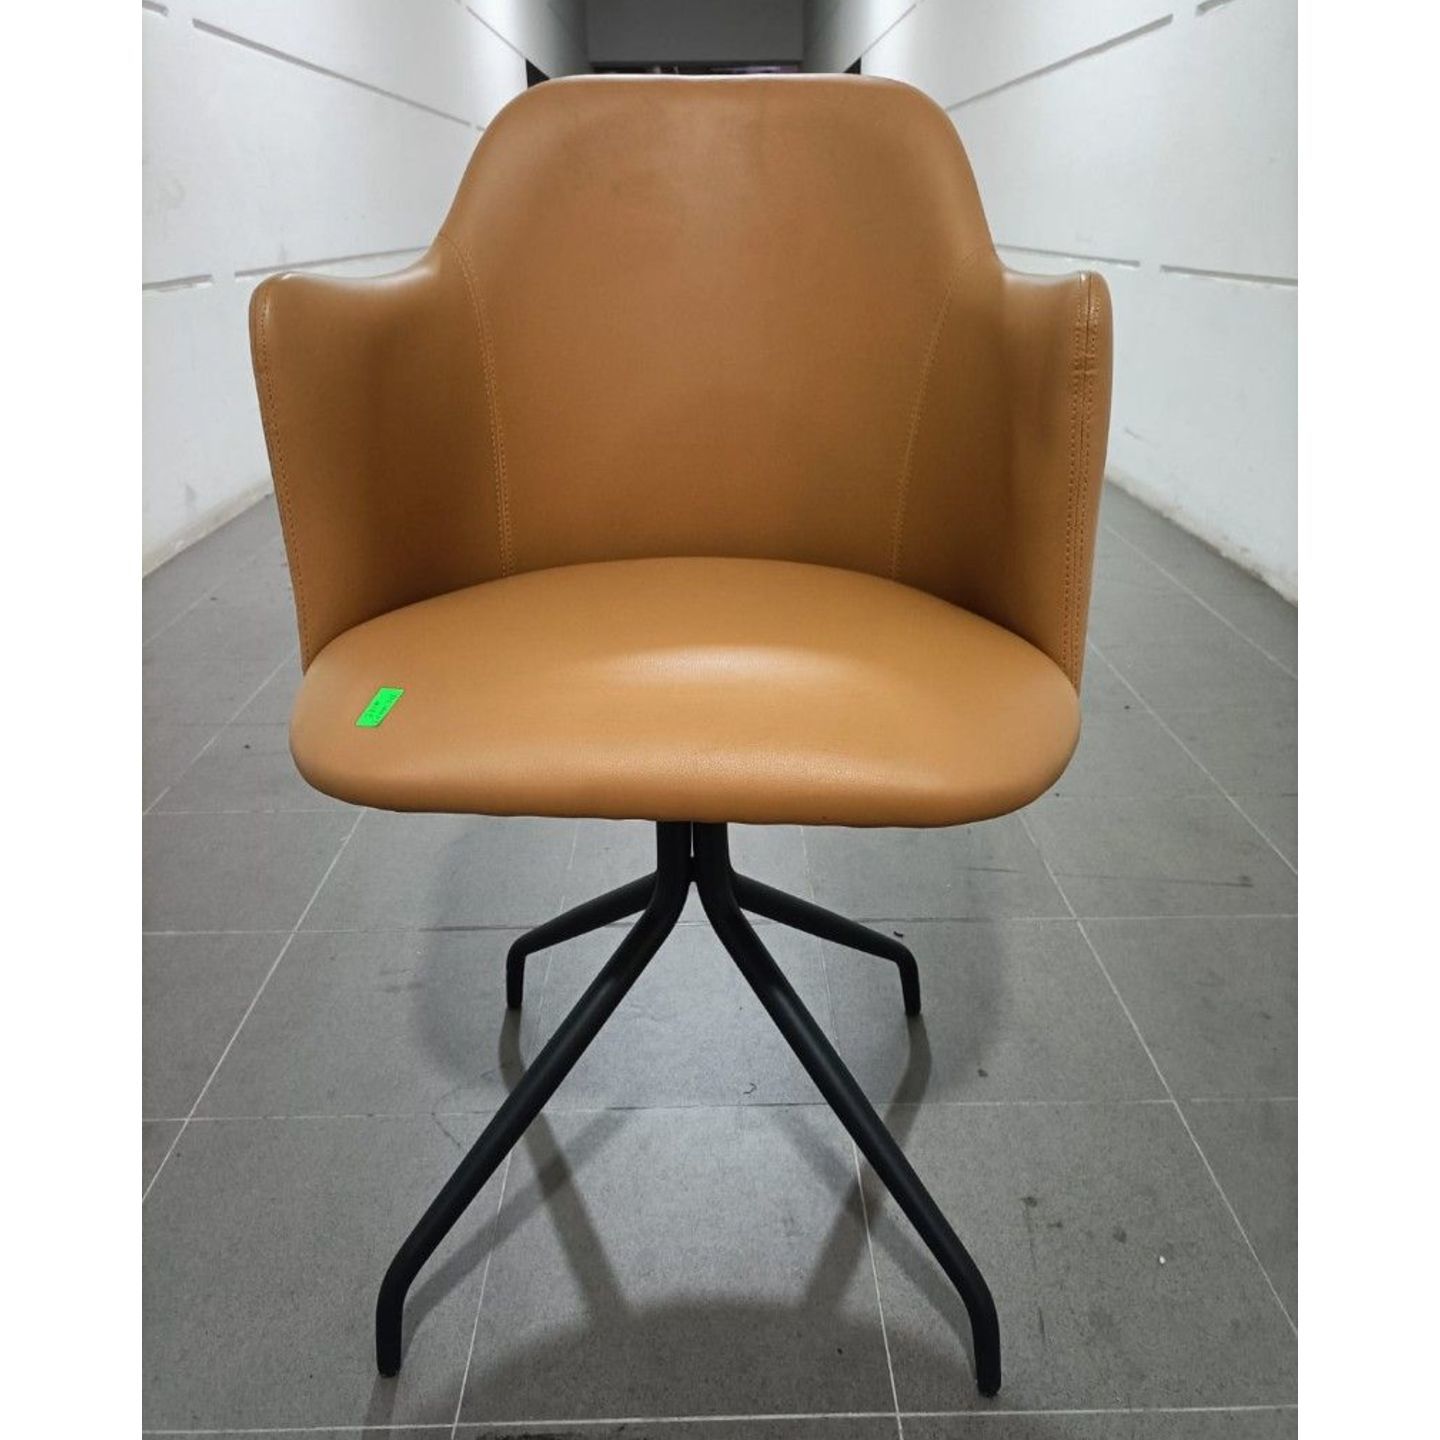 BOSA Chair in BROWN (one piece only)